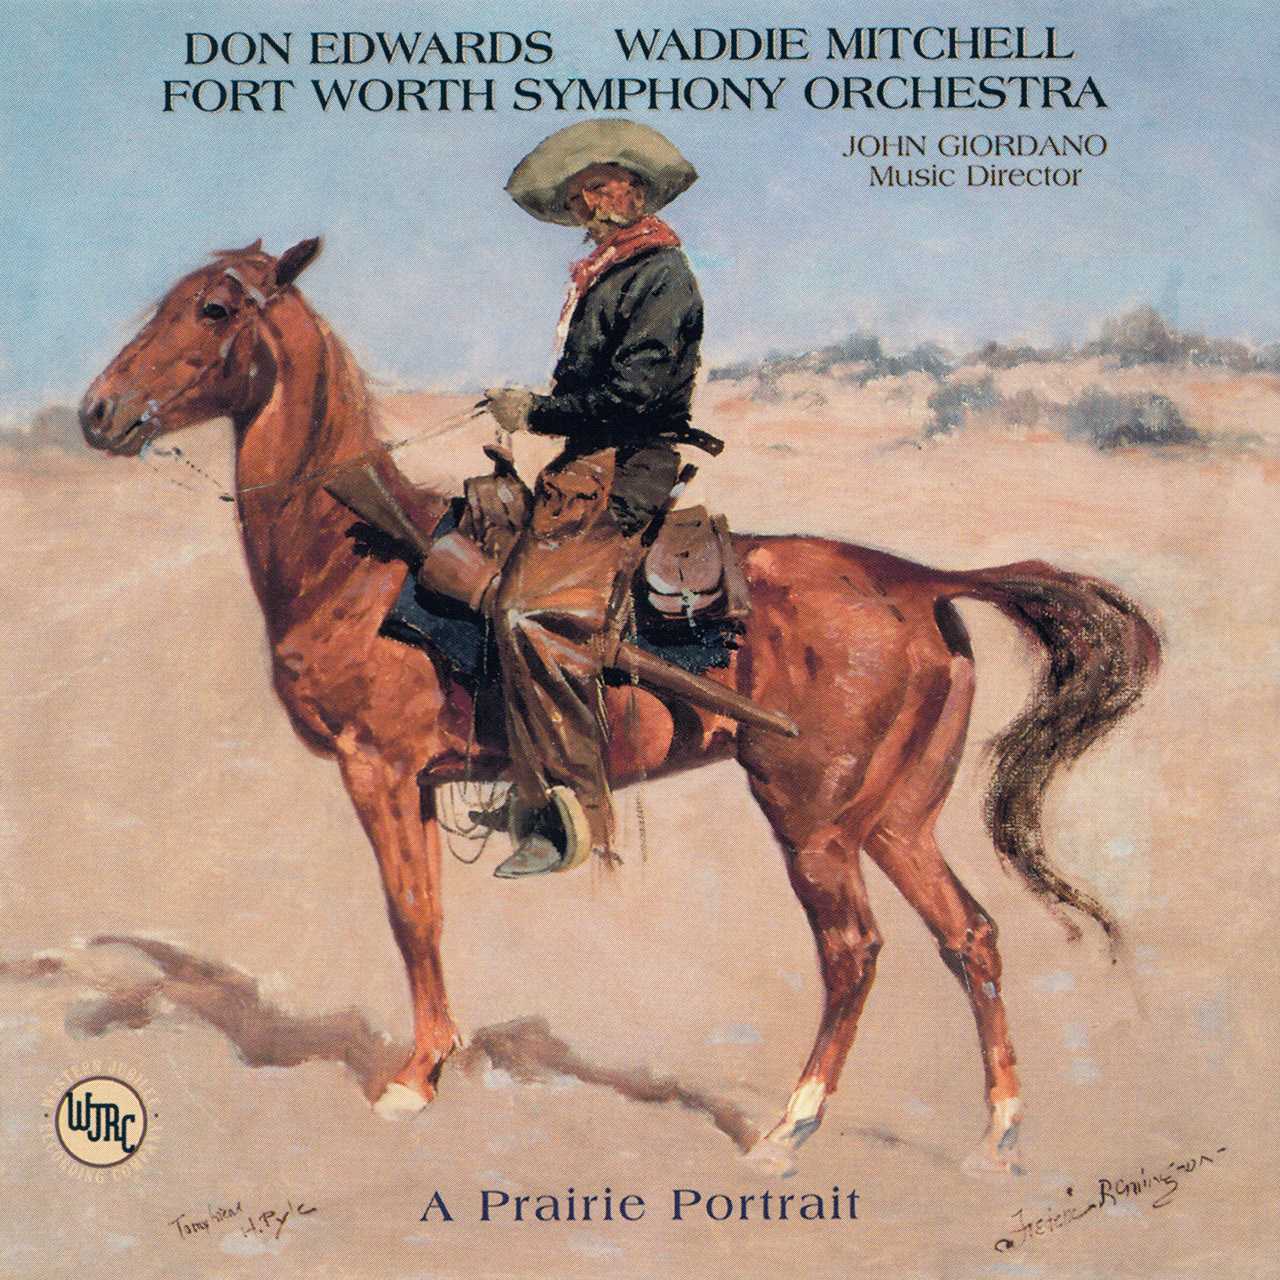 Don Edwards, Waddie Mitchell & The Fort Worth Symphony Orchestra - A Prairie Portrait cover album